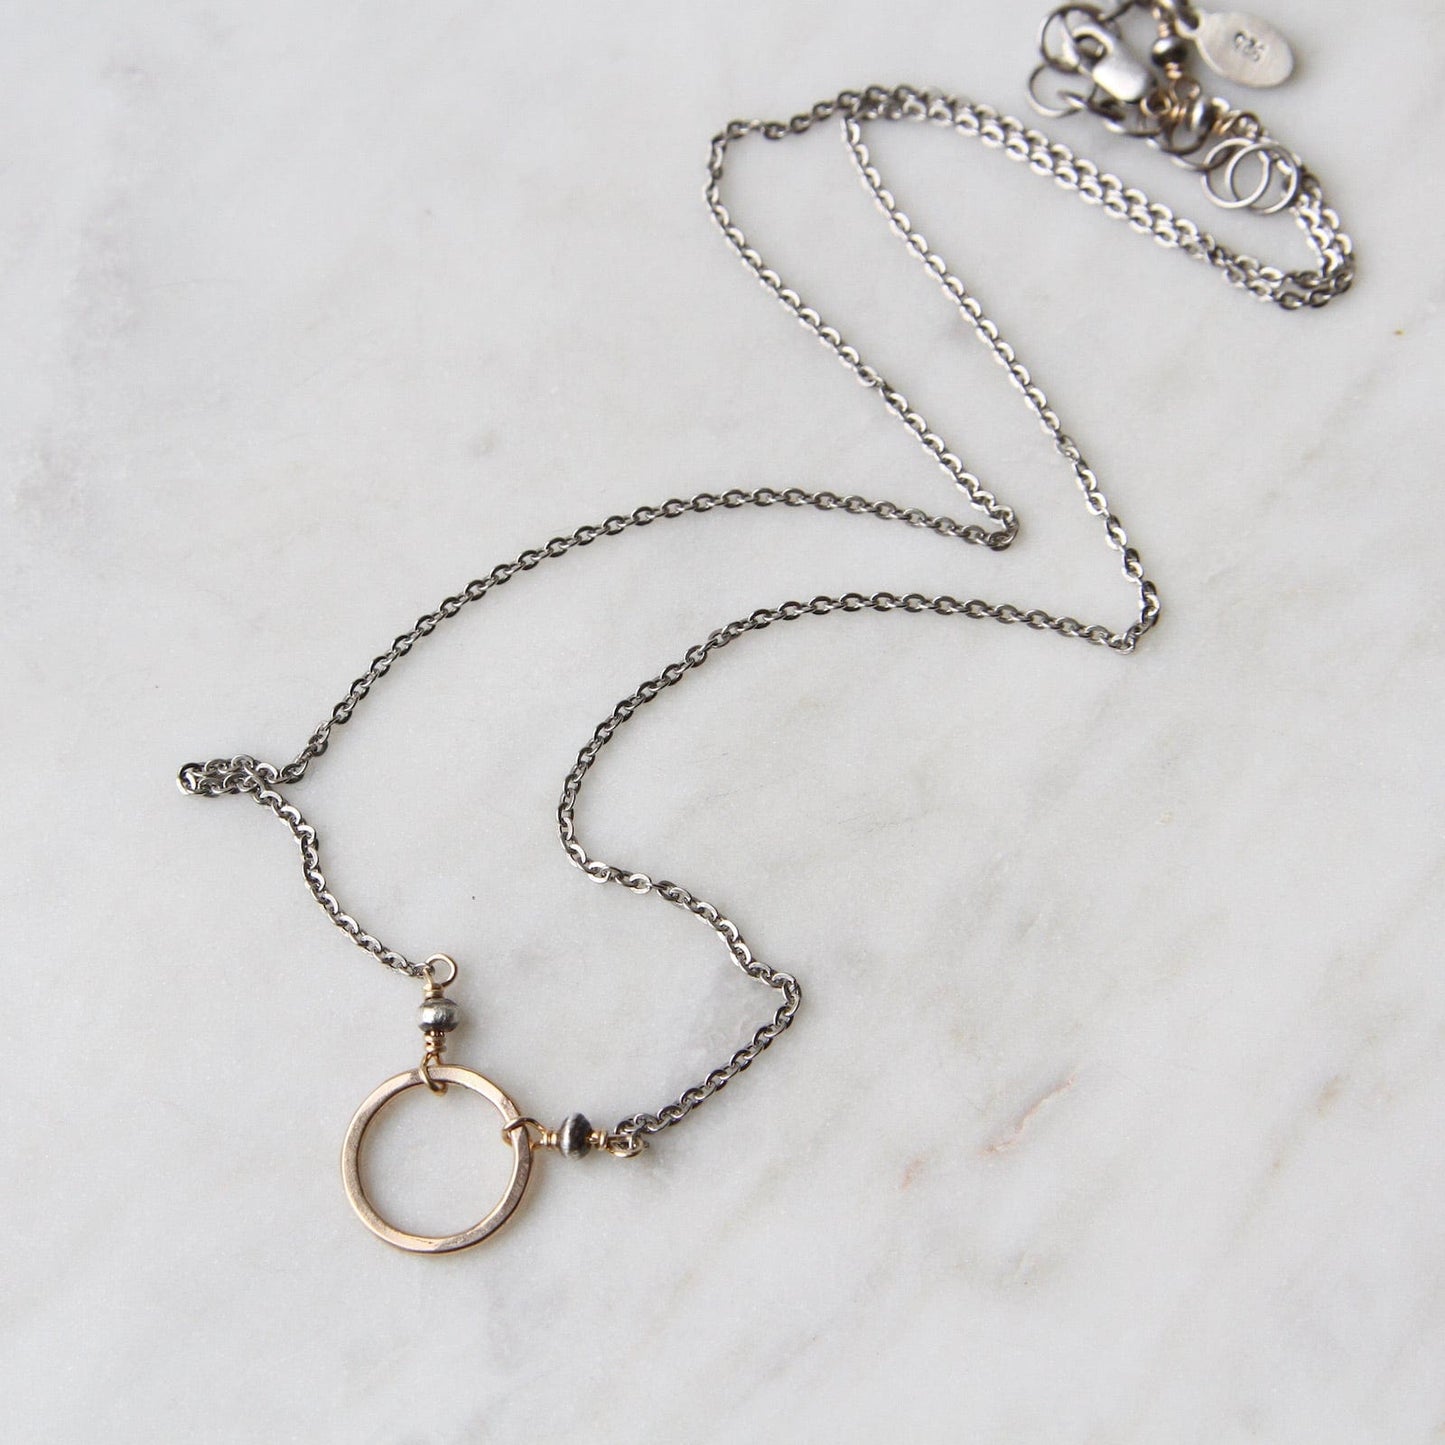 NKL 14k Gold Filled Circle on Oxidized Sterling Silver Chain Necklace